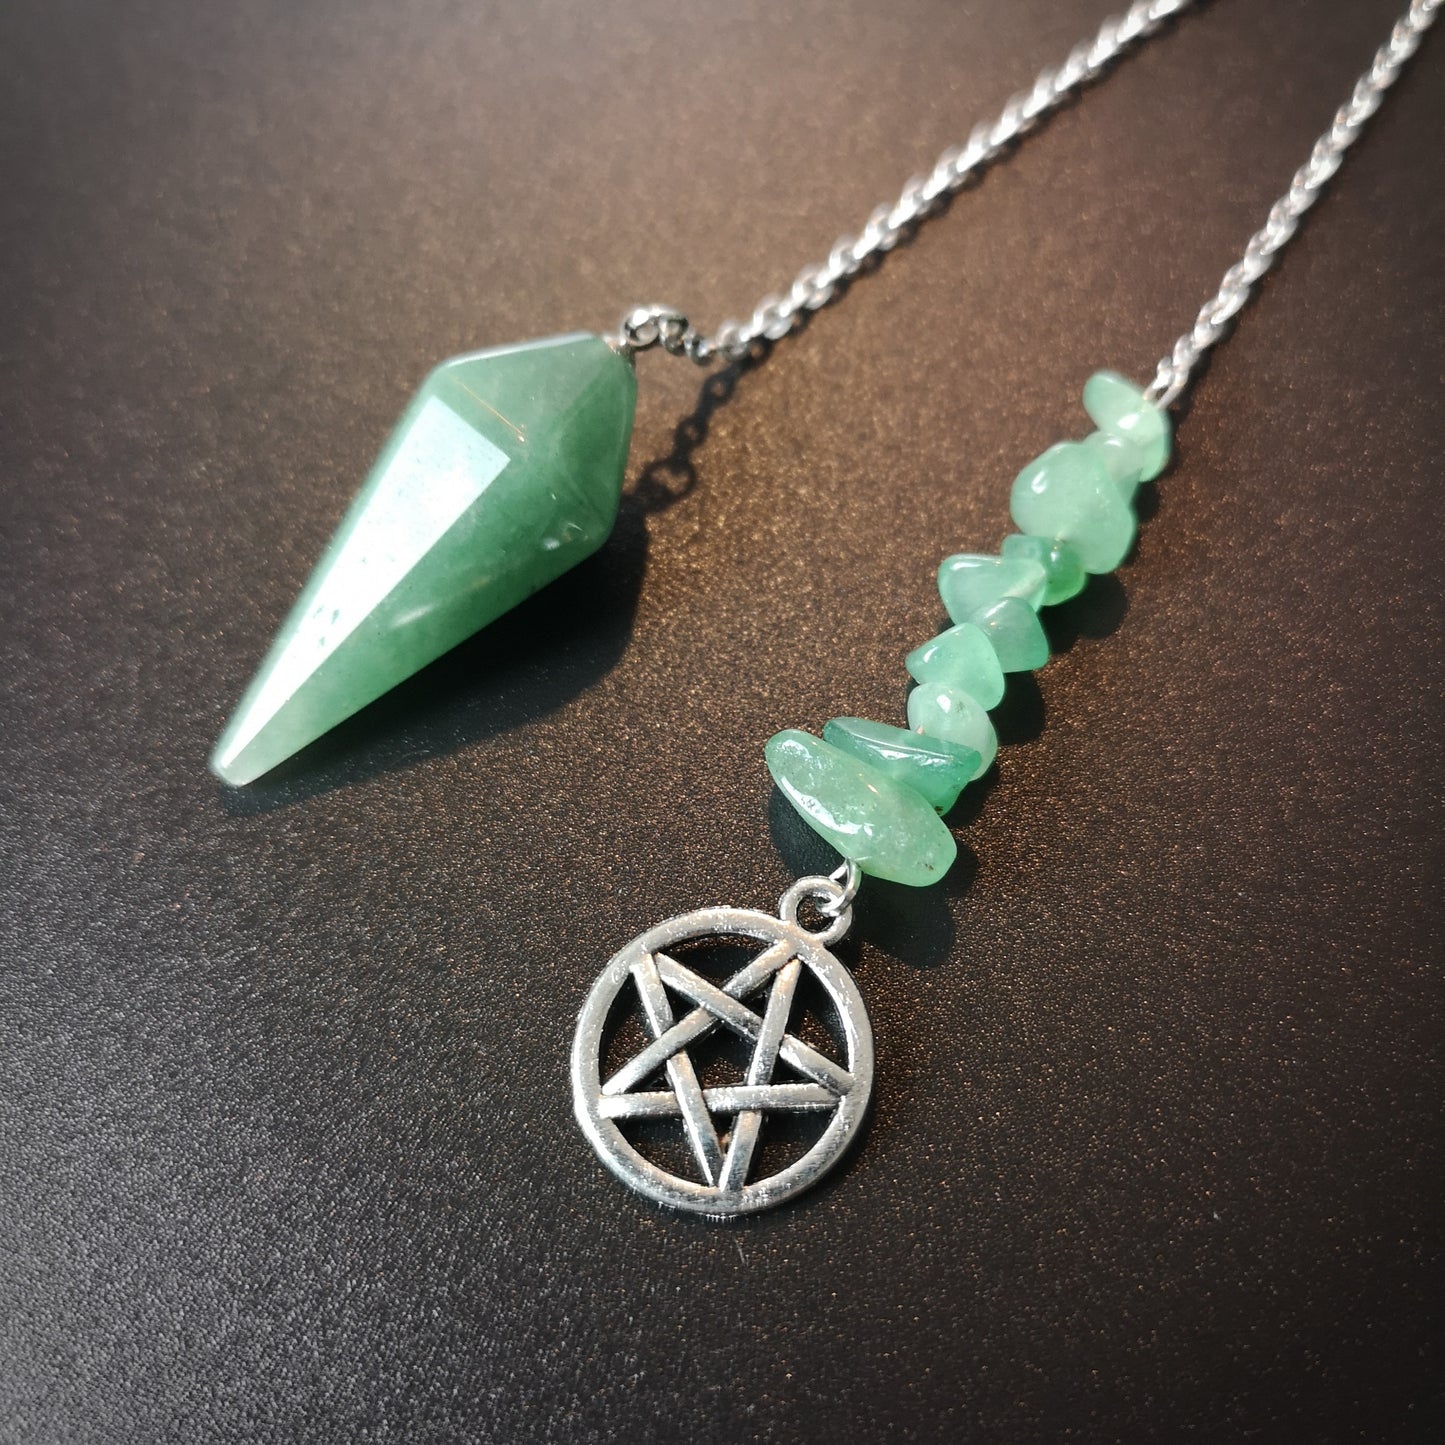 Aventurine and pentacle wiccan pendulum - The French Witch shop